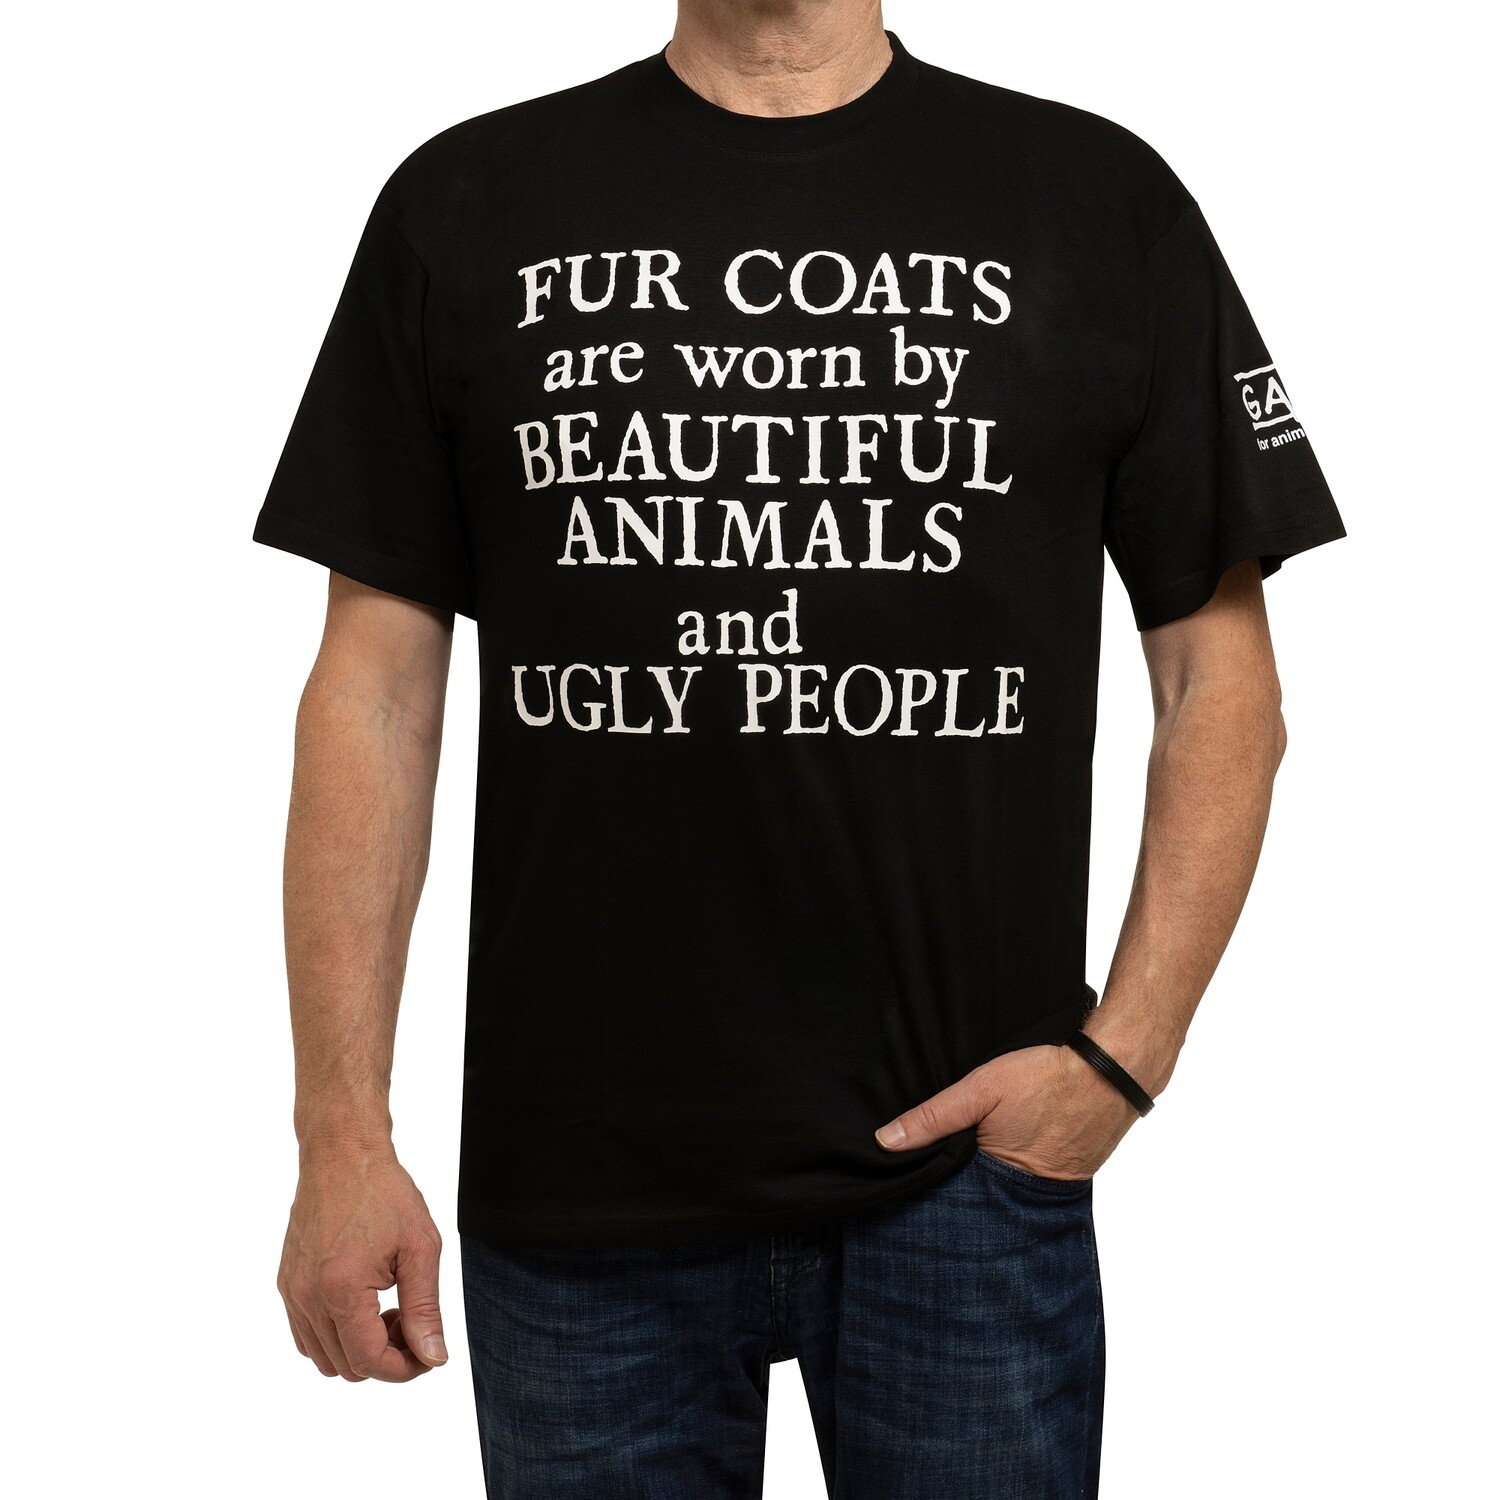 shirt 'Fur coats are worn by beautiful animals and ugly people' (unisex)